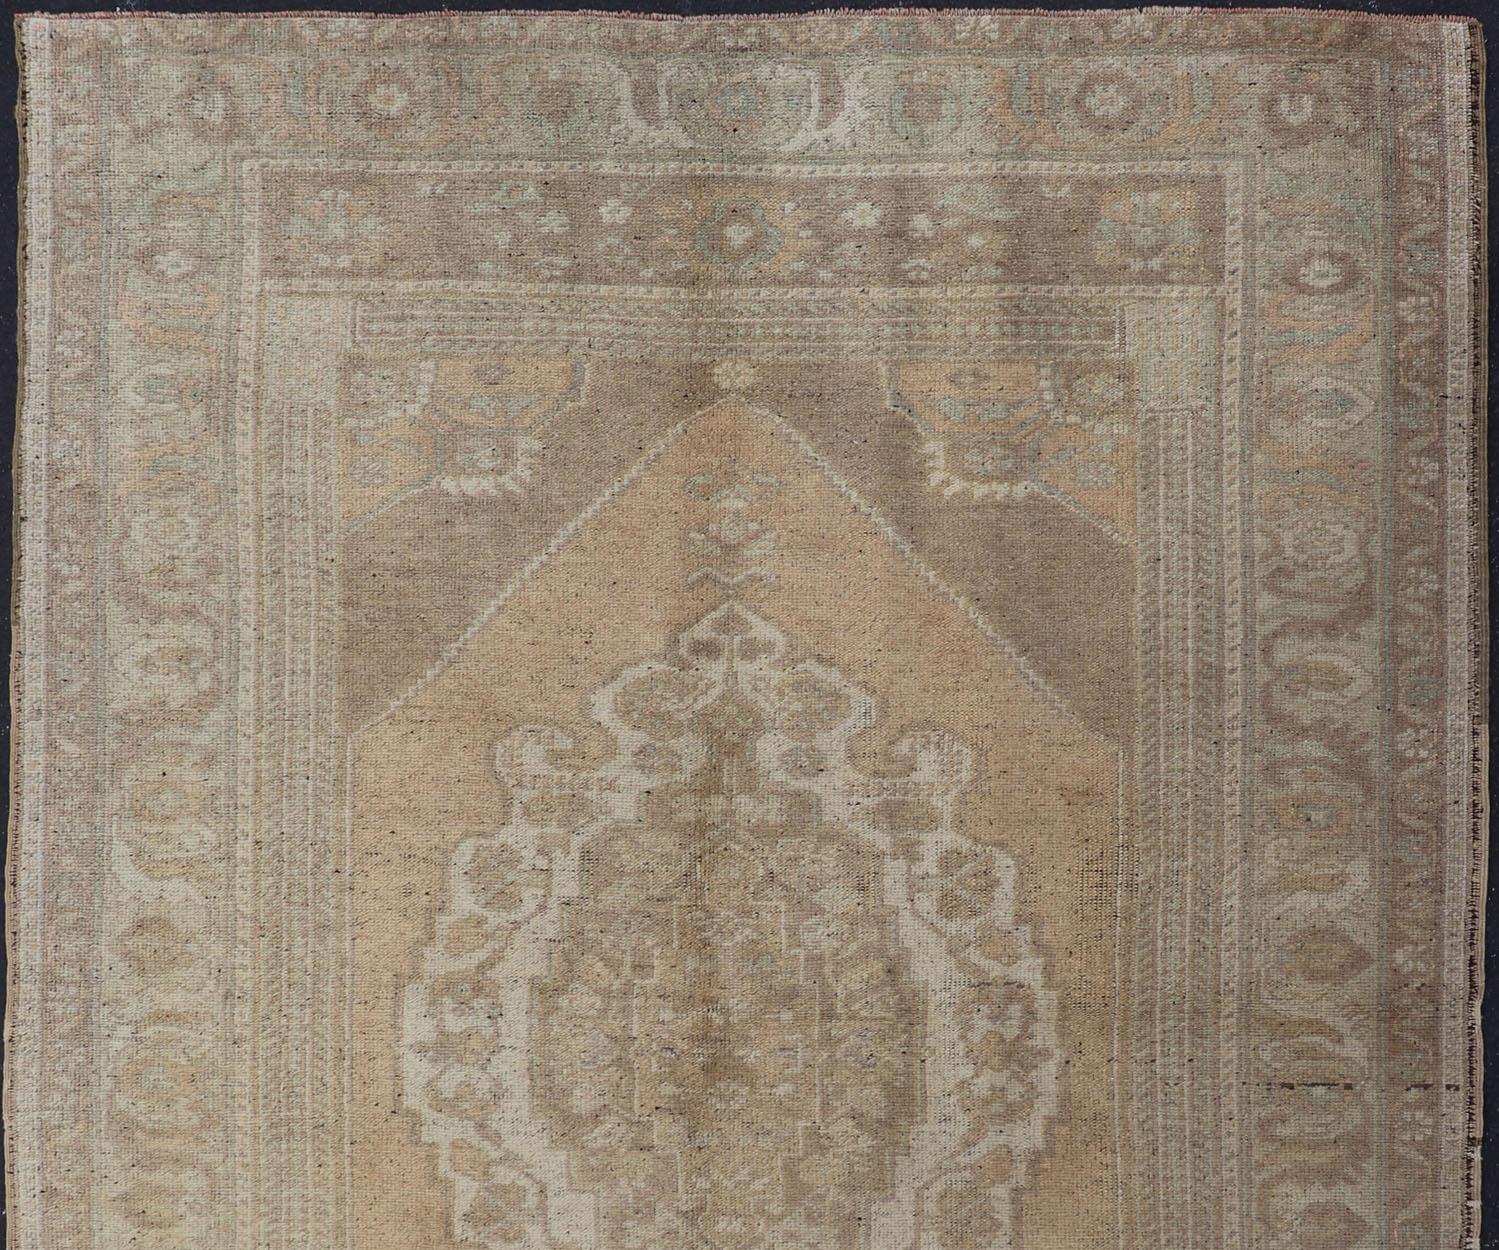 This muted 1940's Turkish Oushak carpet features a design with multi shades of muted colors. The border features repeating flowers and vines rendered in light blues, grays, muted brown and taupe colors.

Measures: 5'1 x 7'5
 Muted vintage Turkish